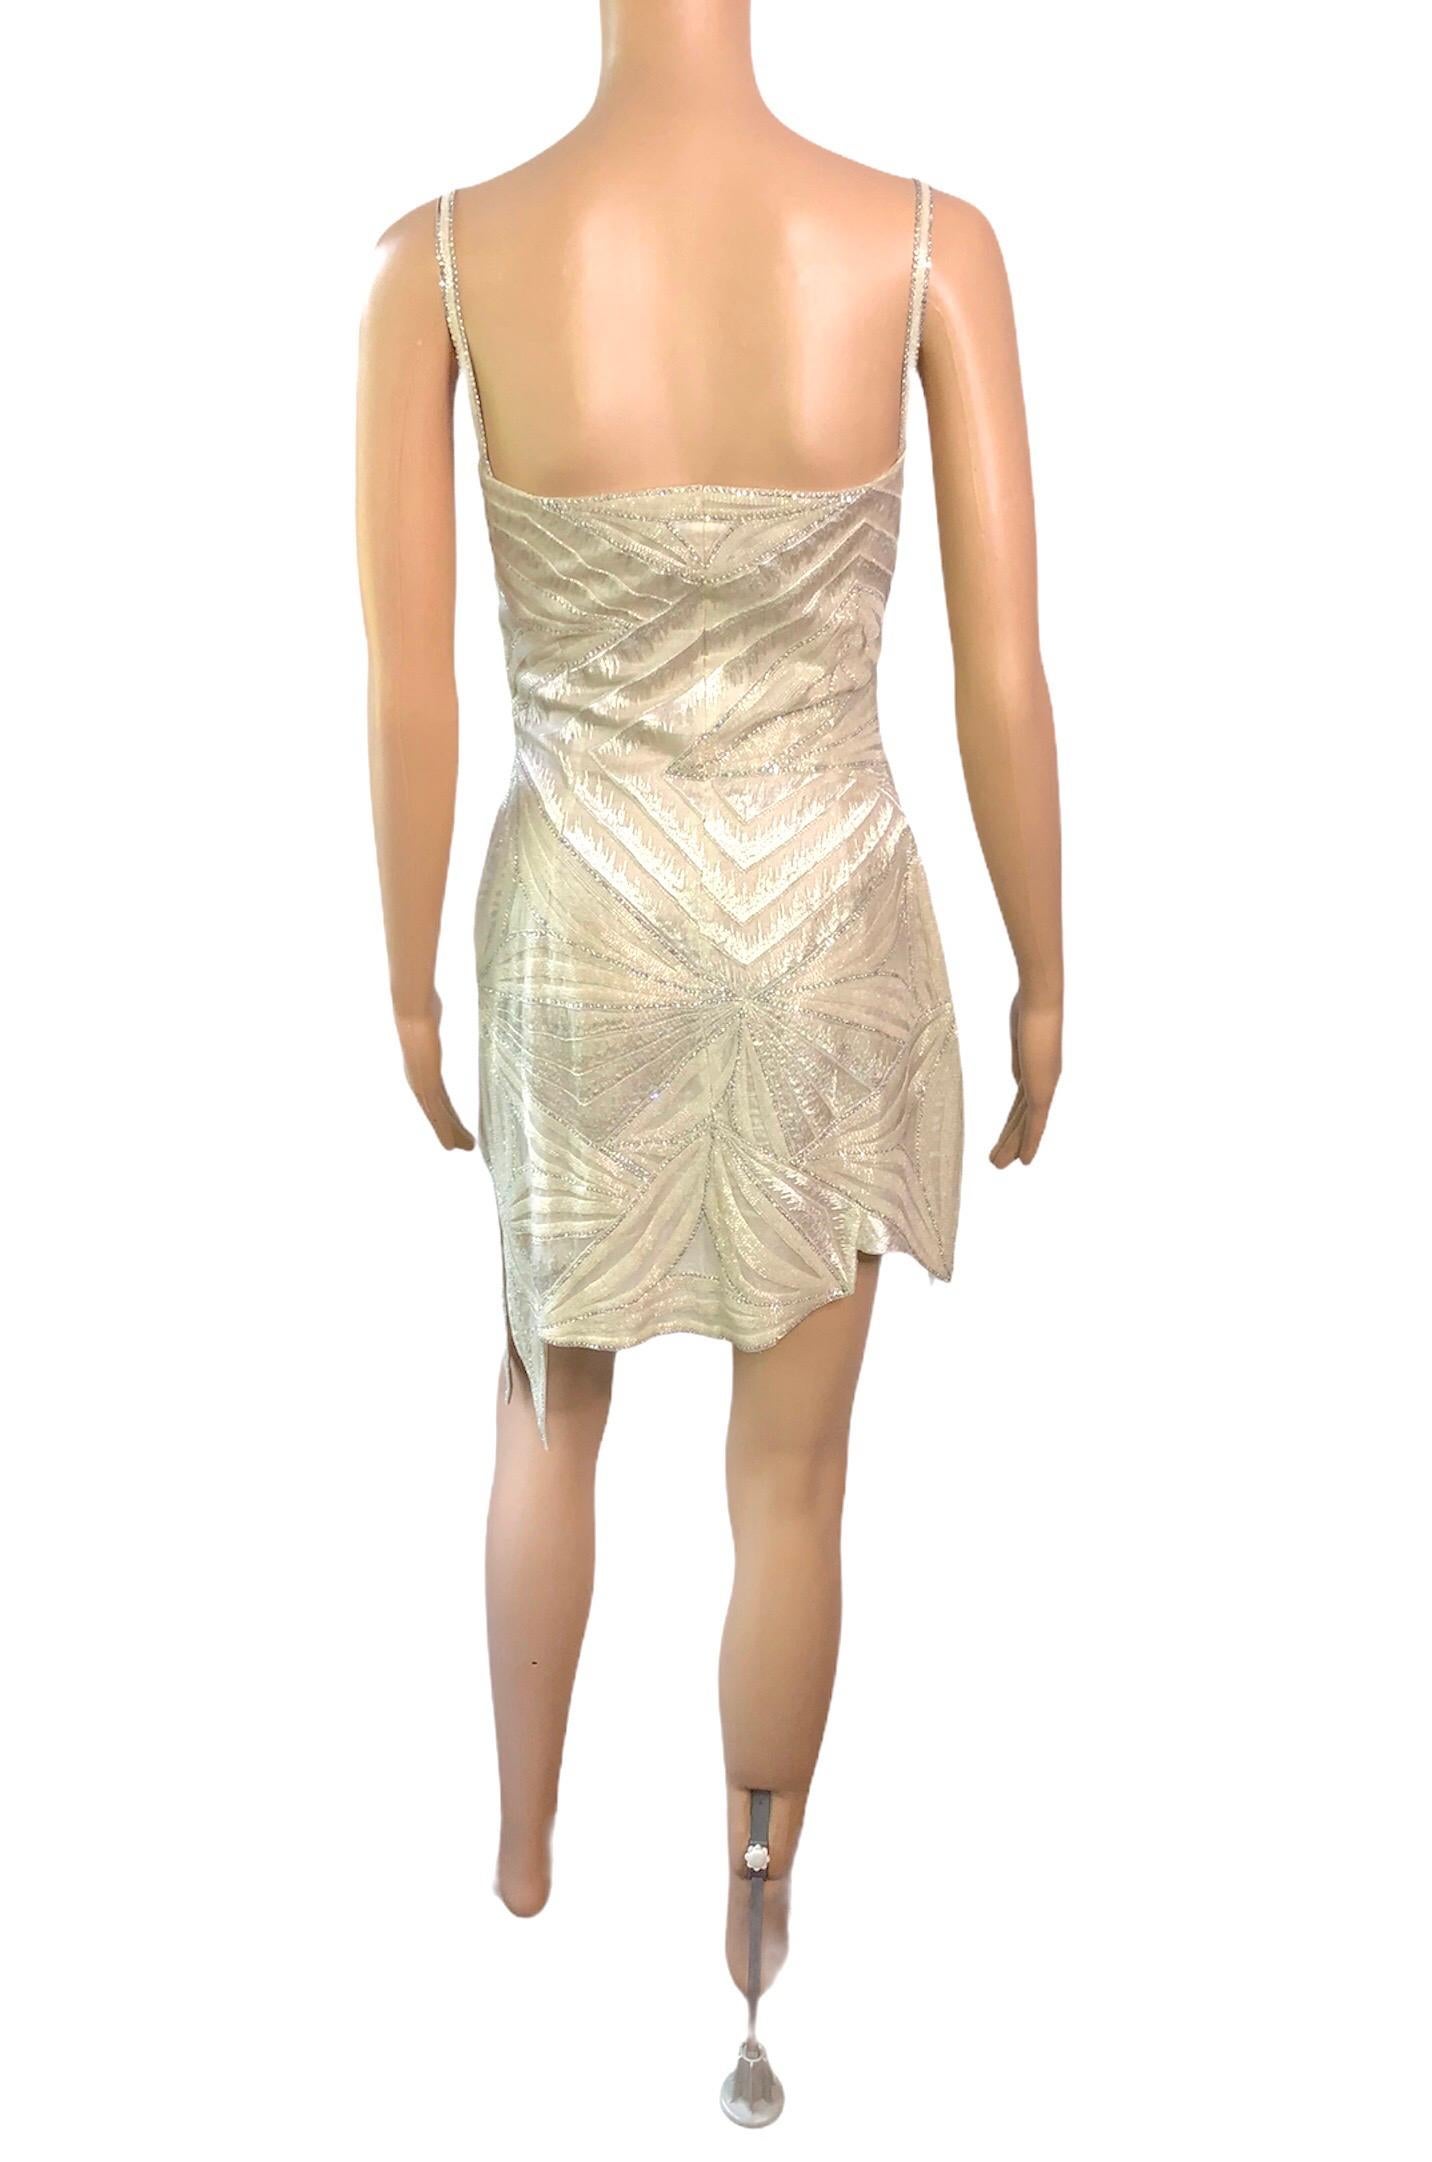 Atelier Versace Haute Couture F/W 1998 Embellished Sheer Cutout Mini Dress For Sale 6